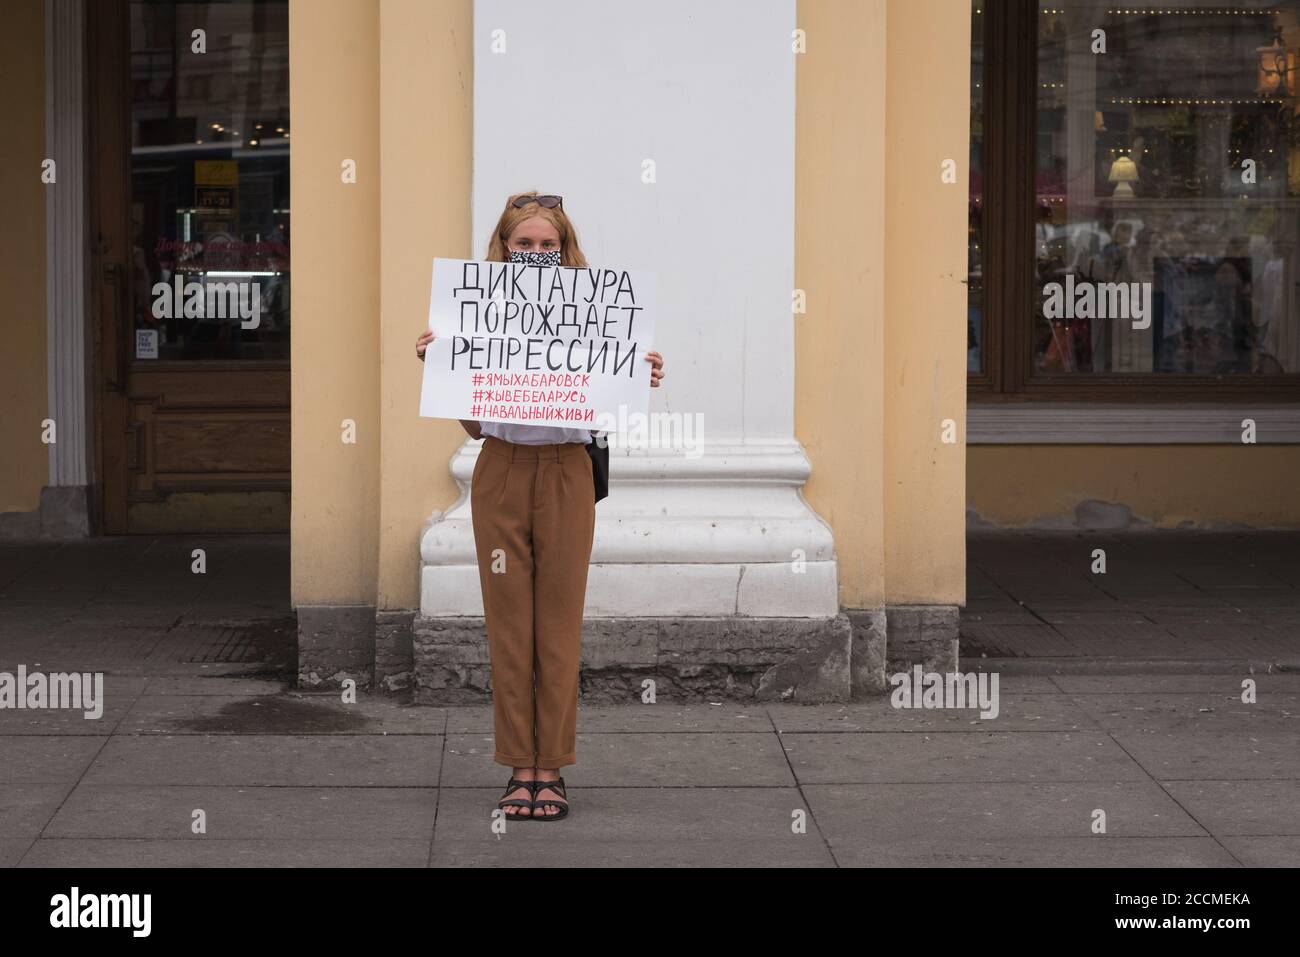 Saint Petersburg, Russia - August 22, 2020: a protester holds a poster saying in Russian 'Dictatorship Breeds Repression' with hashtags. Stock Photo